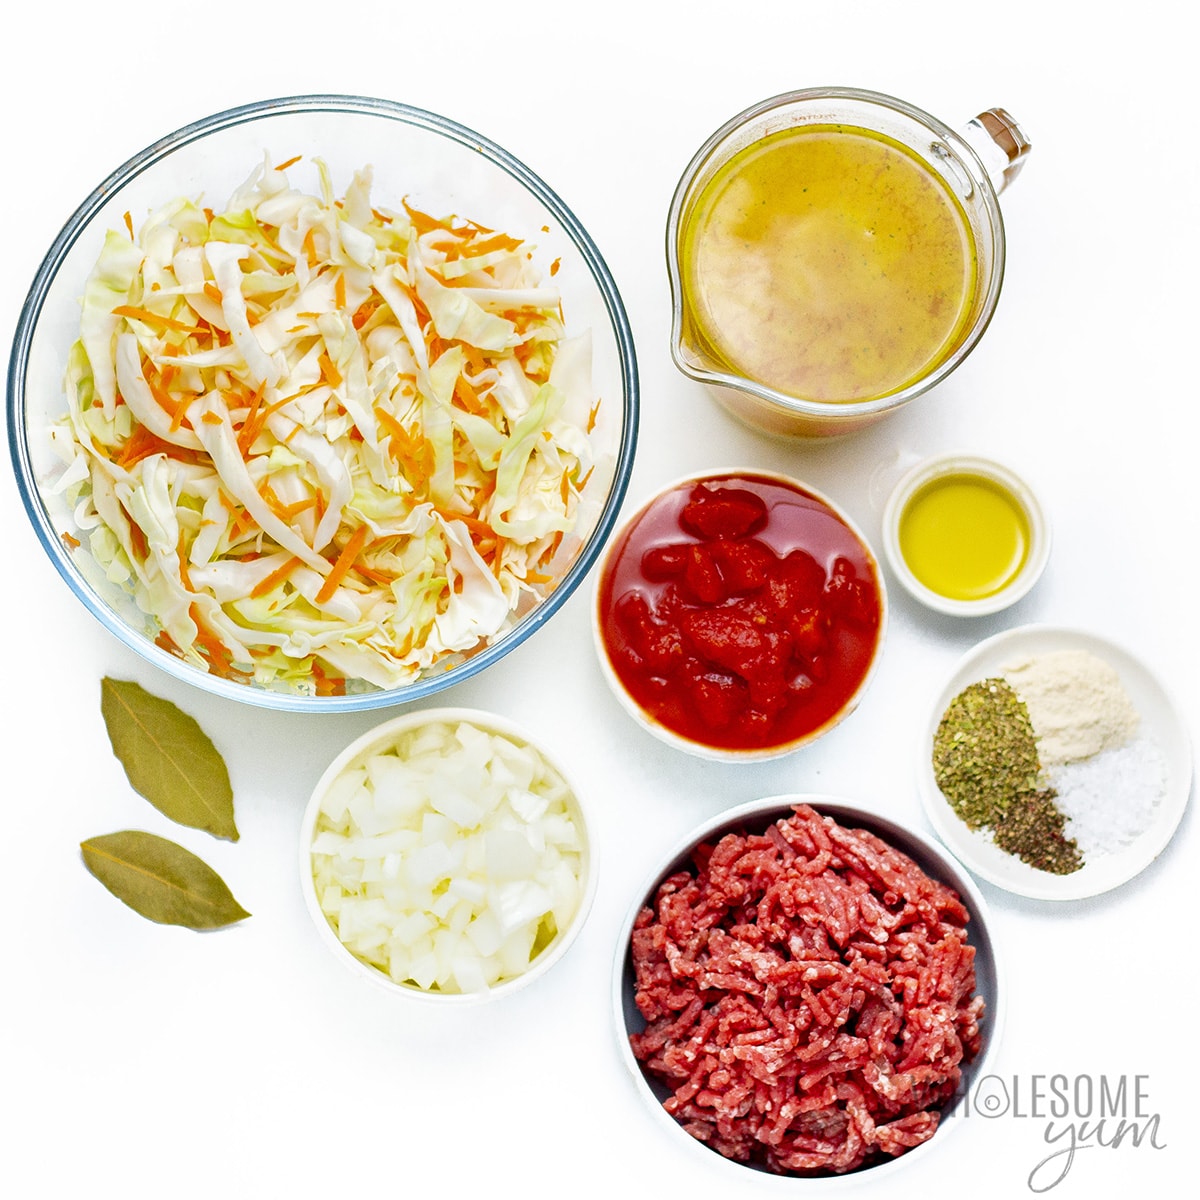 Ingredients for how to make cabbage soup in bowls.